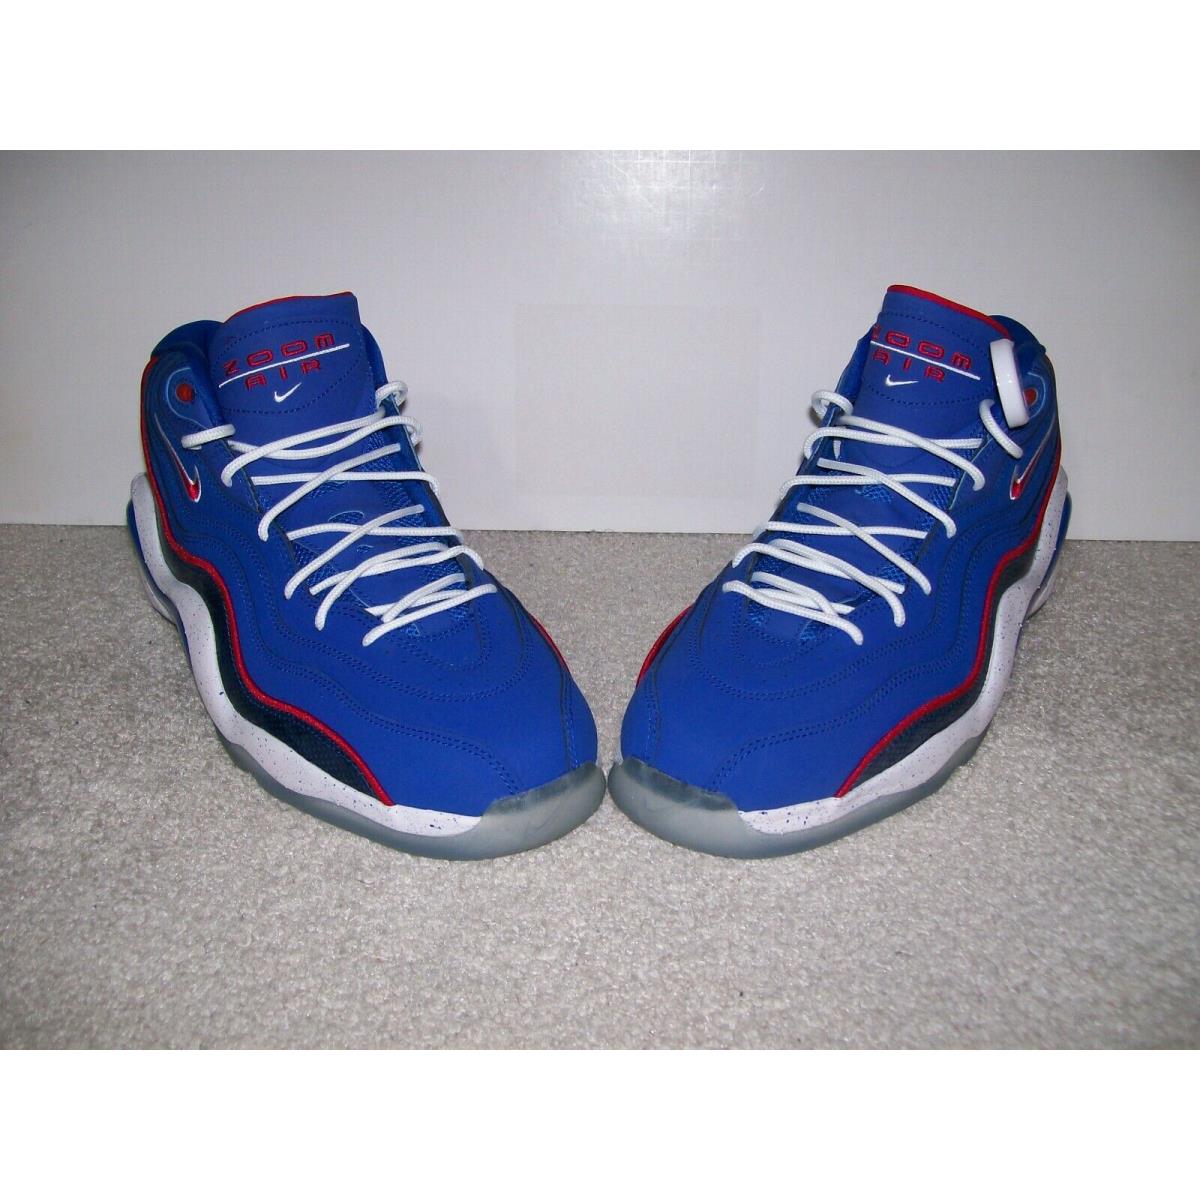 Nike shoes Air Zoom Flight - Blue Red White 1